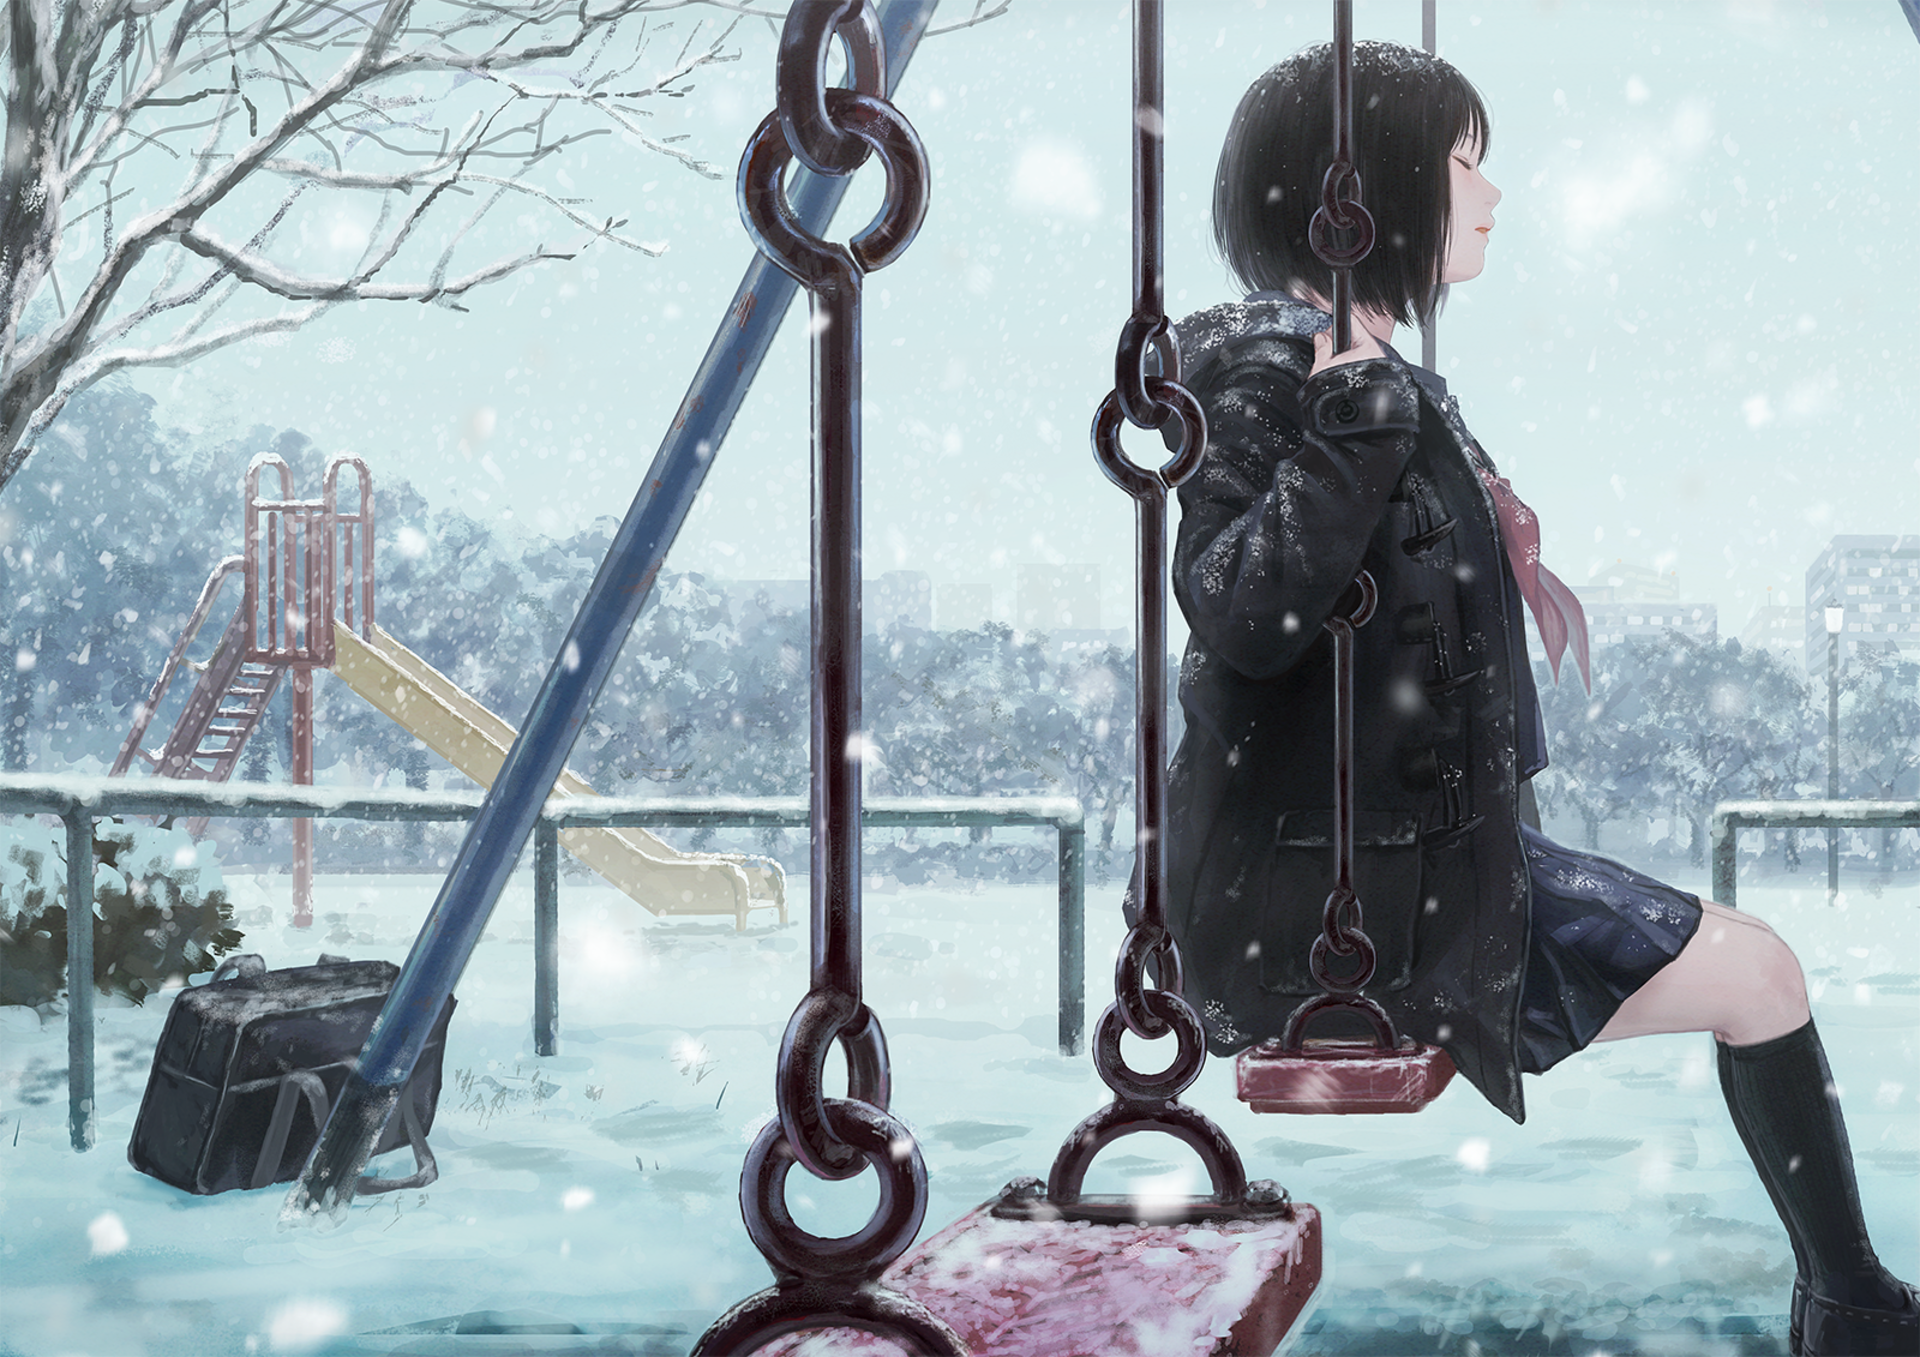 Anime girl on a swing on a calm winter day HD Wallpaper